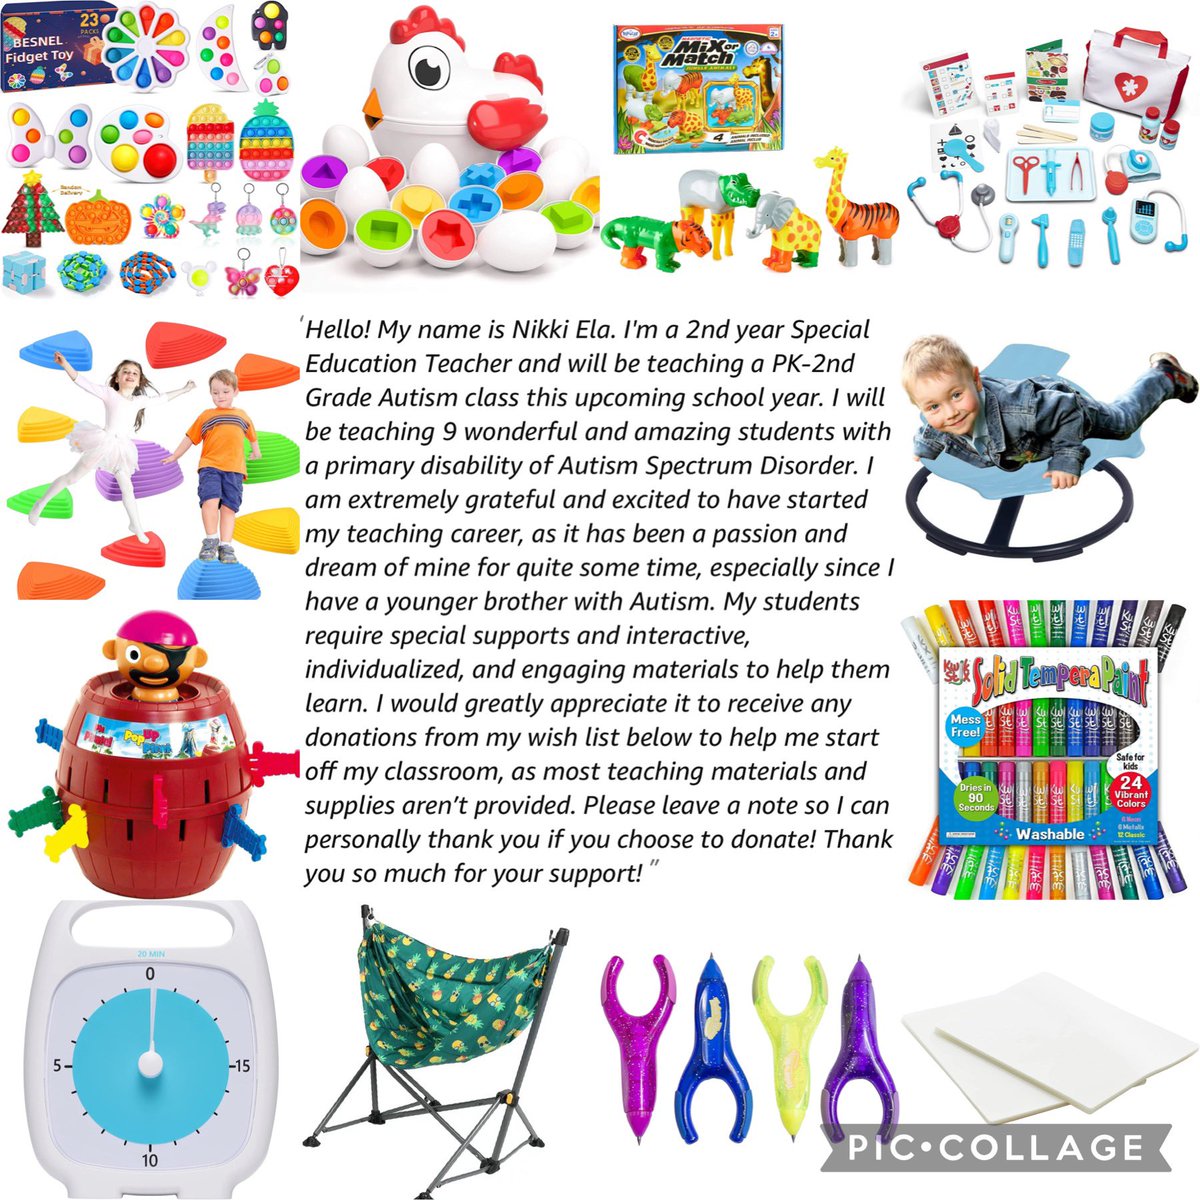 Haven’t seen much movement on my list but I’m not giving up! I’ll be a 2nd year SpEd teacher and teaching a PK-2 Autism class! I’d really appreciate any help getting materials! Drop your list and I’ll RT! Thanks! ❤️ #AdoptATeacher #Clearthelist

Linktr.ee/niknikteach